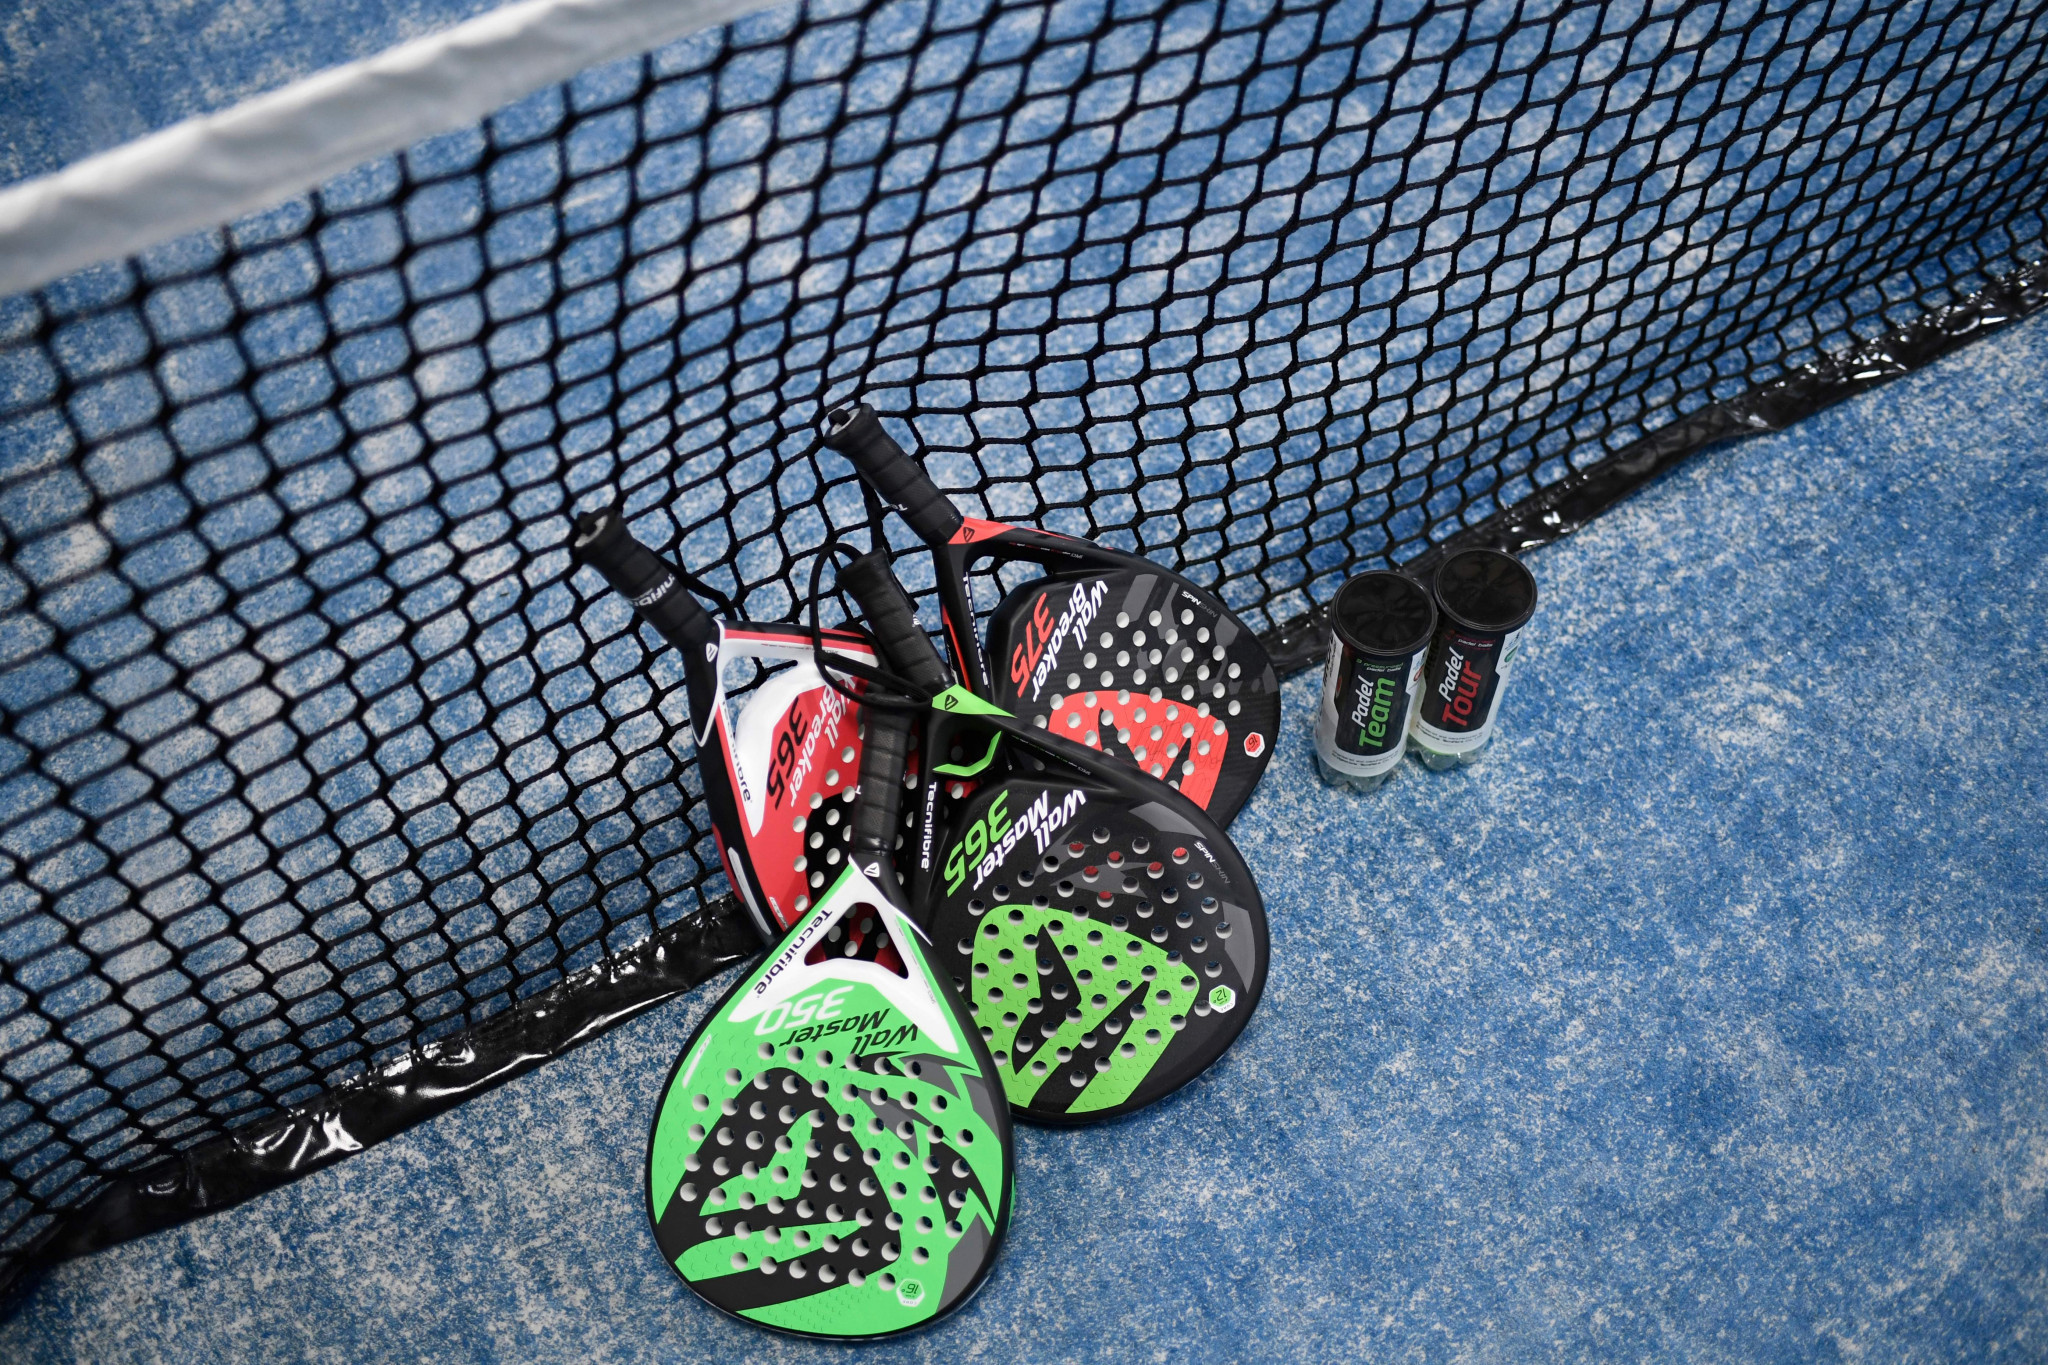 Lebrón and Galán top seeds for second Premier Padel major in Rome